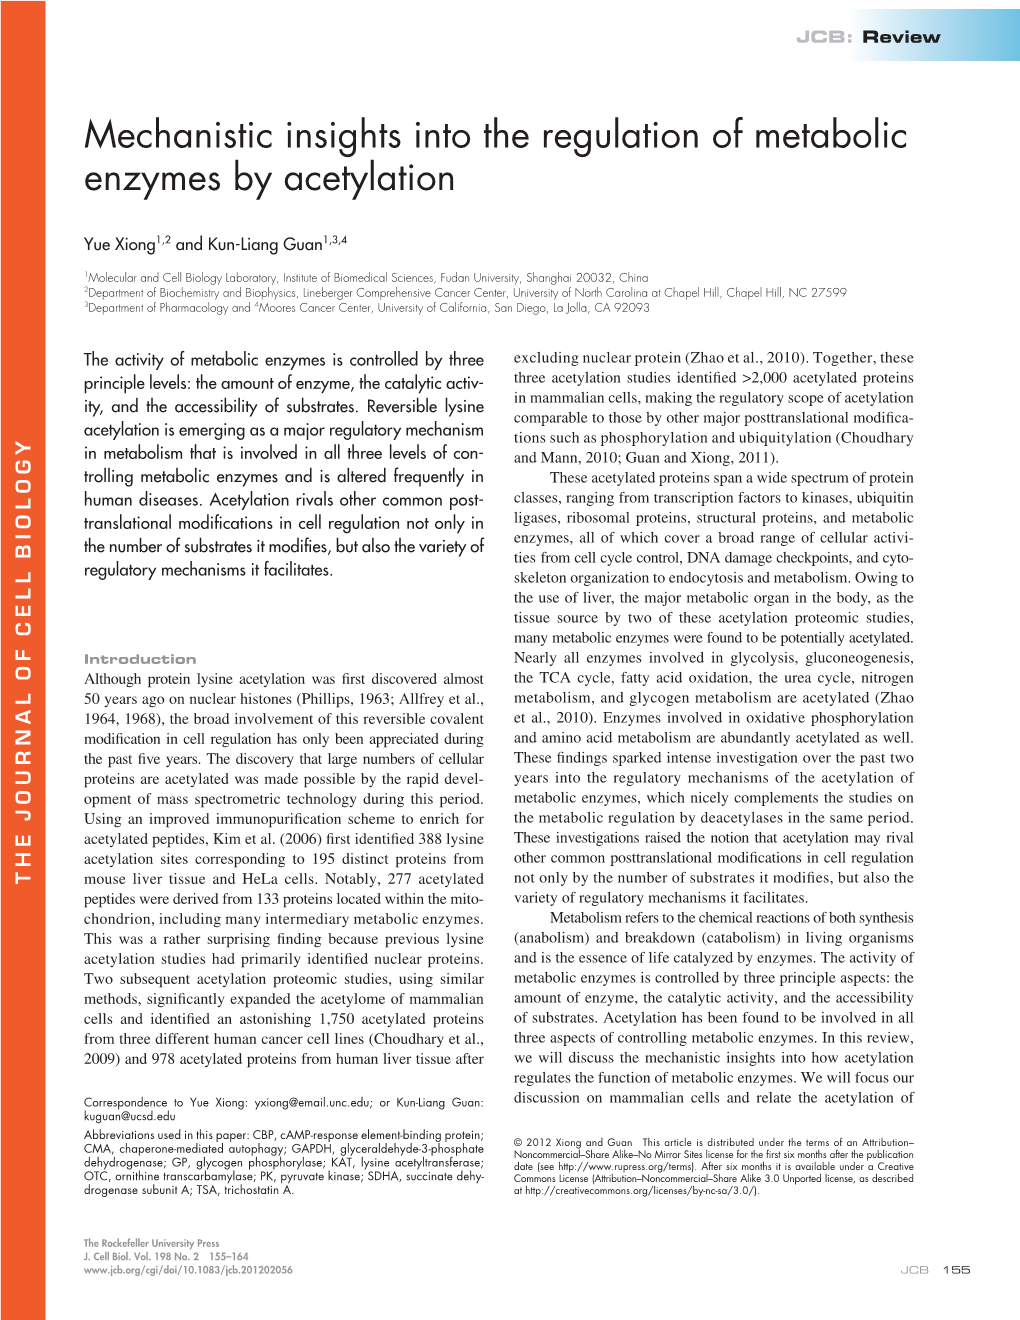 Mechanistic Insights Into the Regulation of Metabolic Enzymes by Acetylation